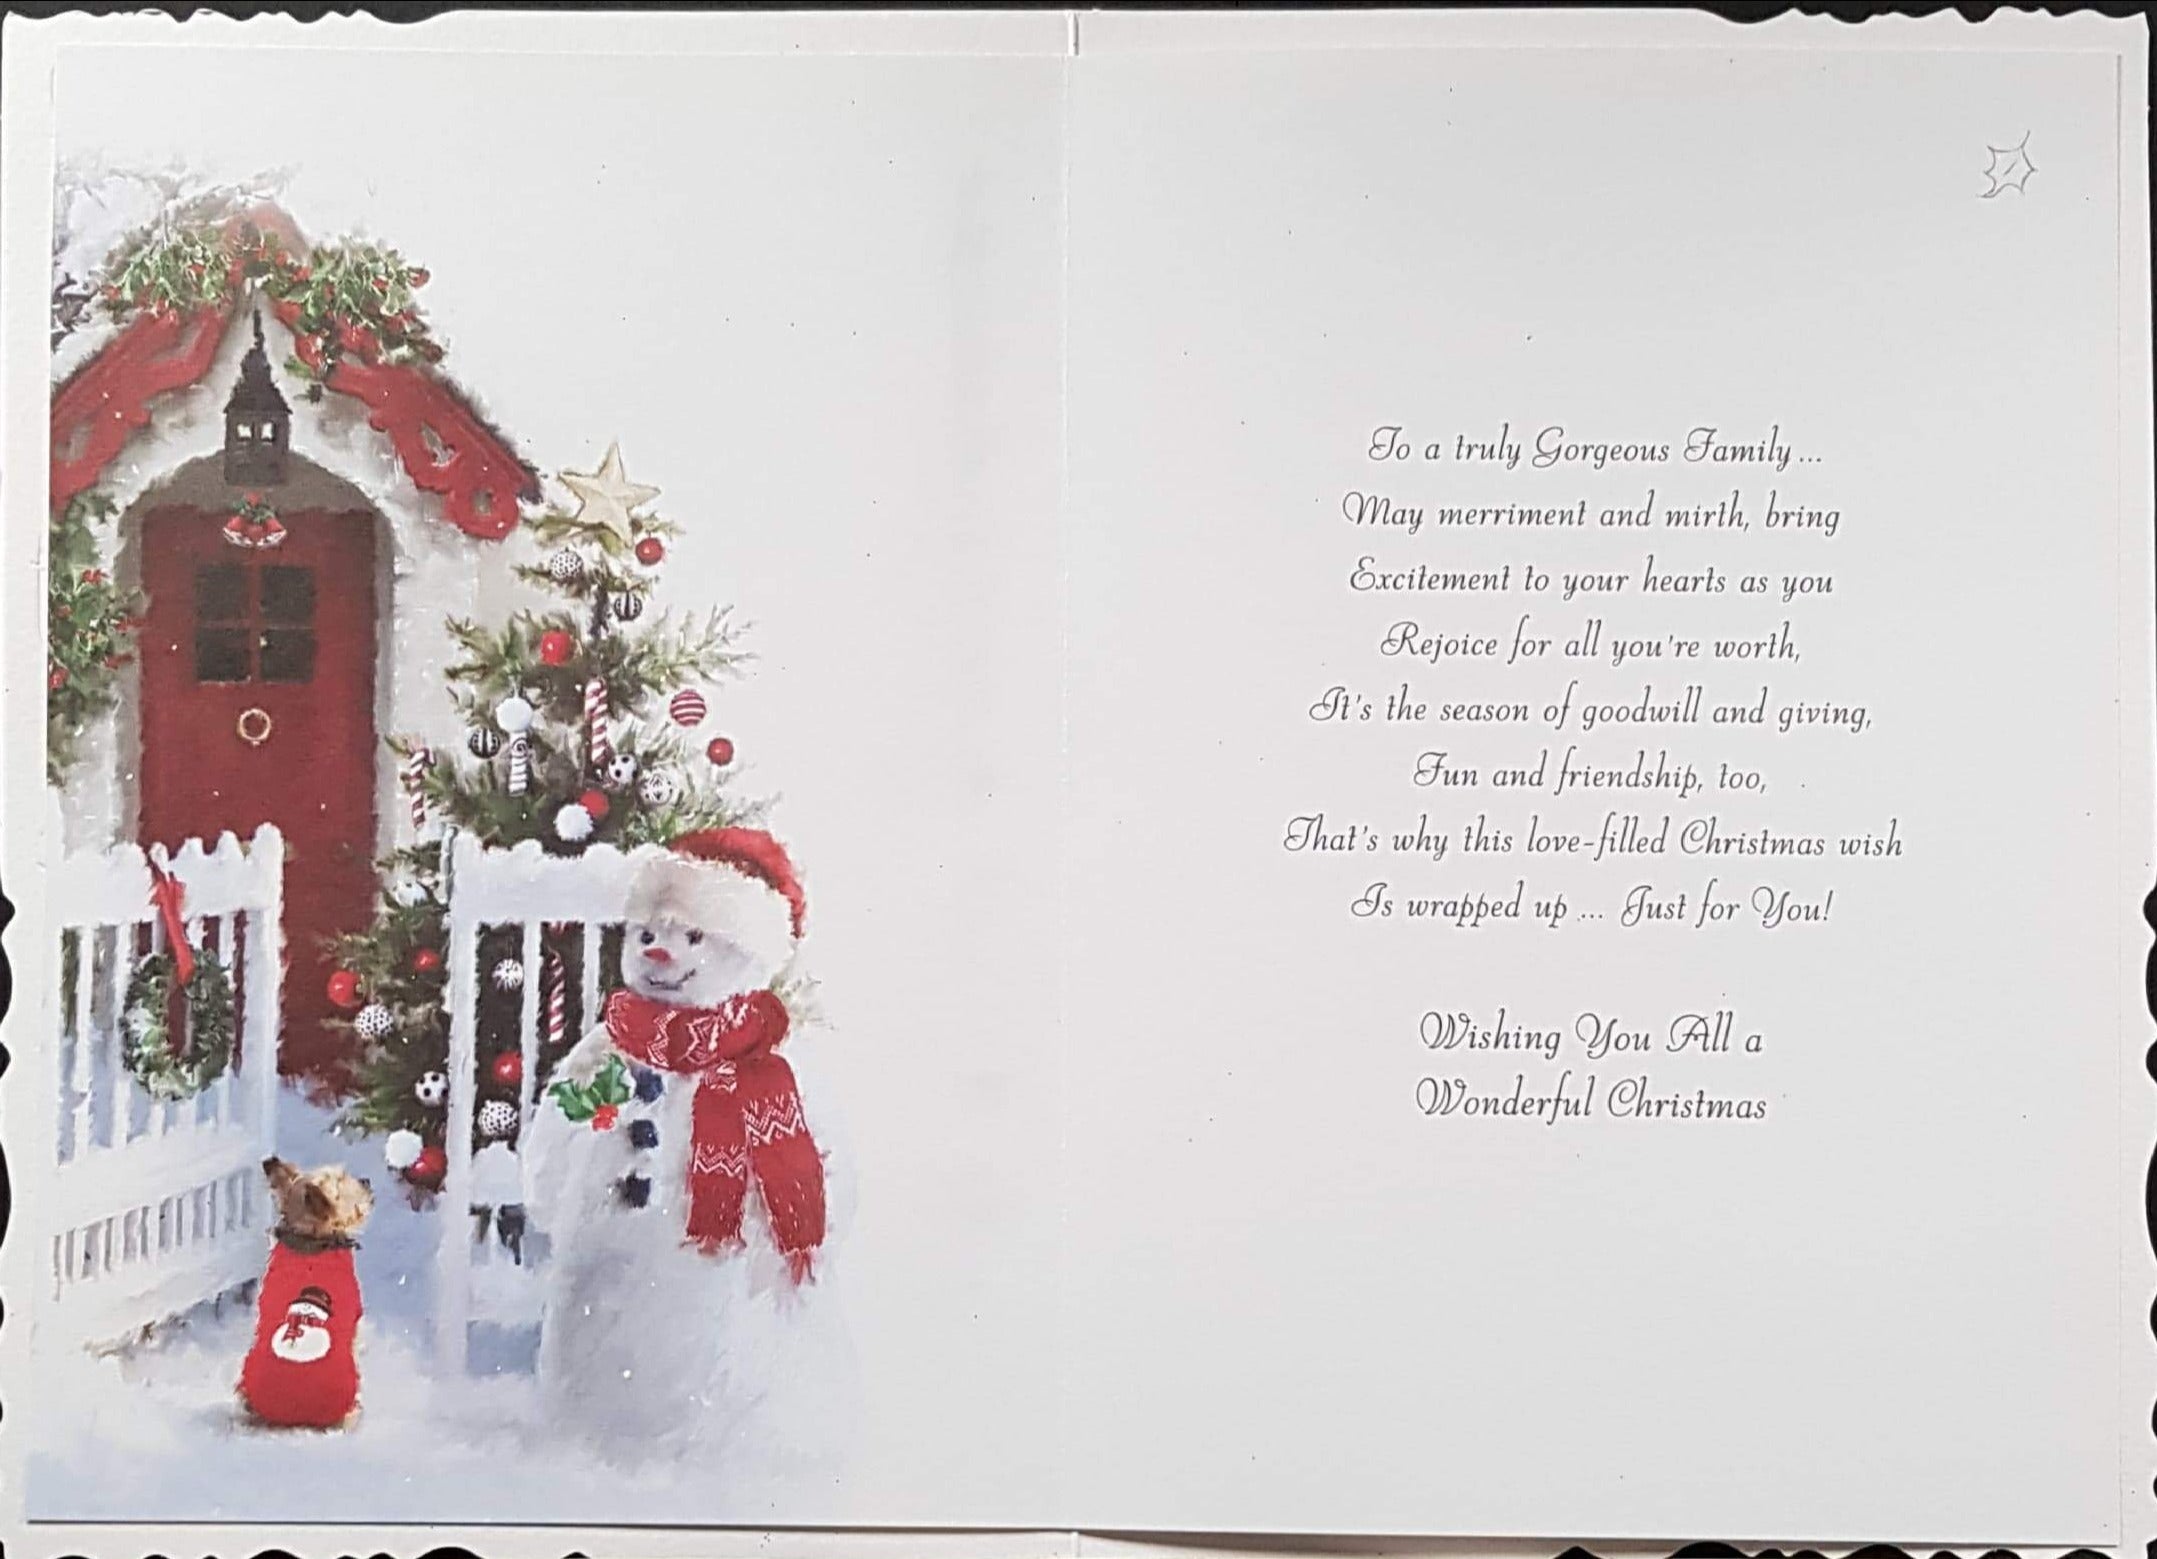 Son And Family Christmas Card - Love and Christmas Wishes & Snowman, Dog & Decorated Front Door